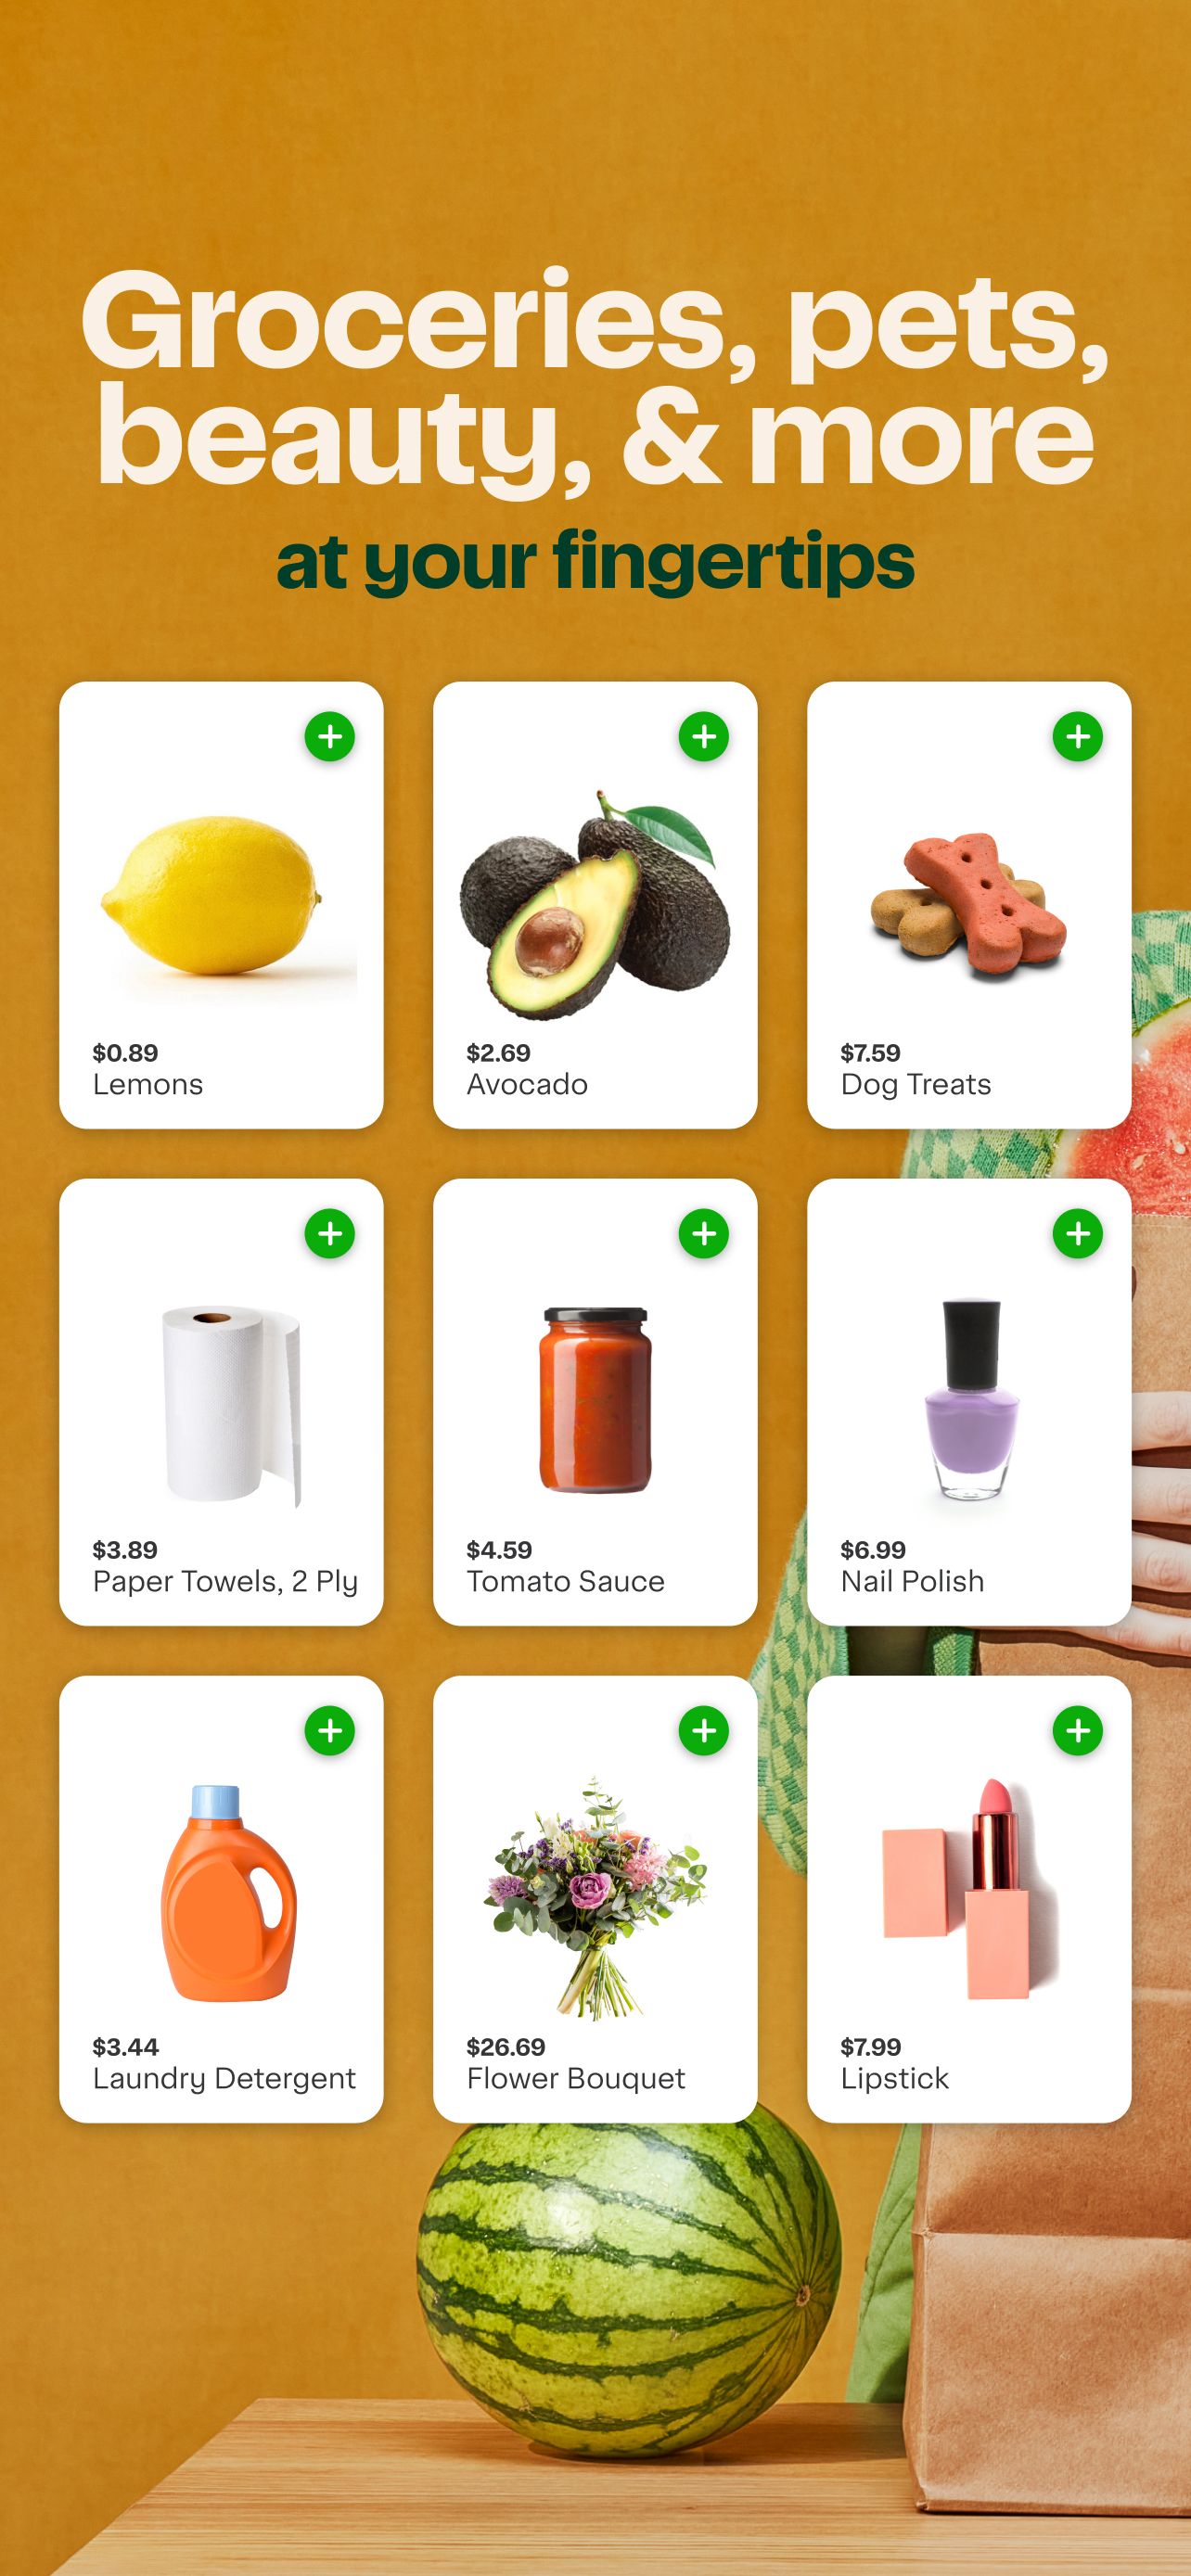 Groceries, pet, beauth, and more at your fingertips with Instacart